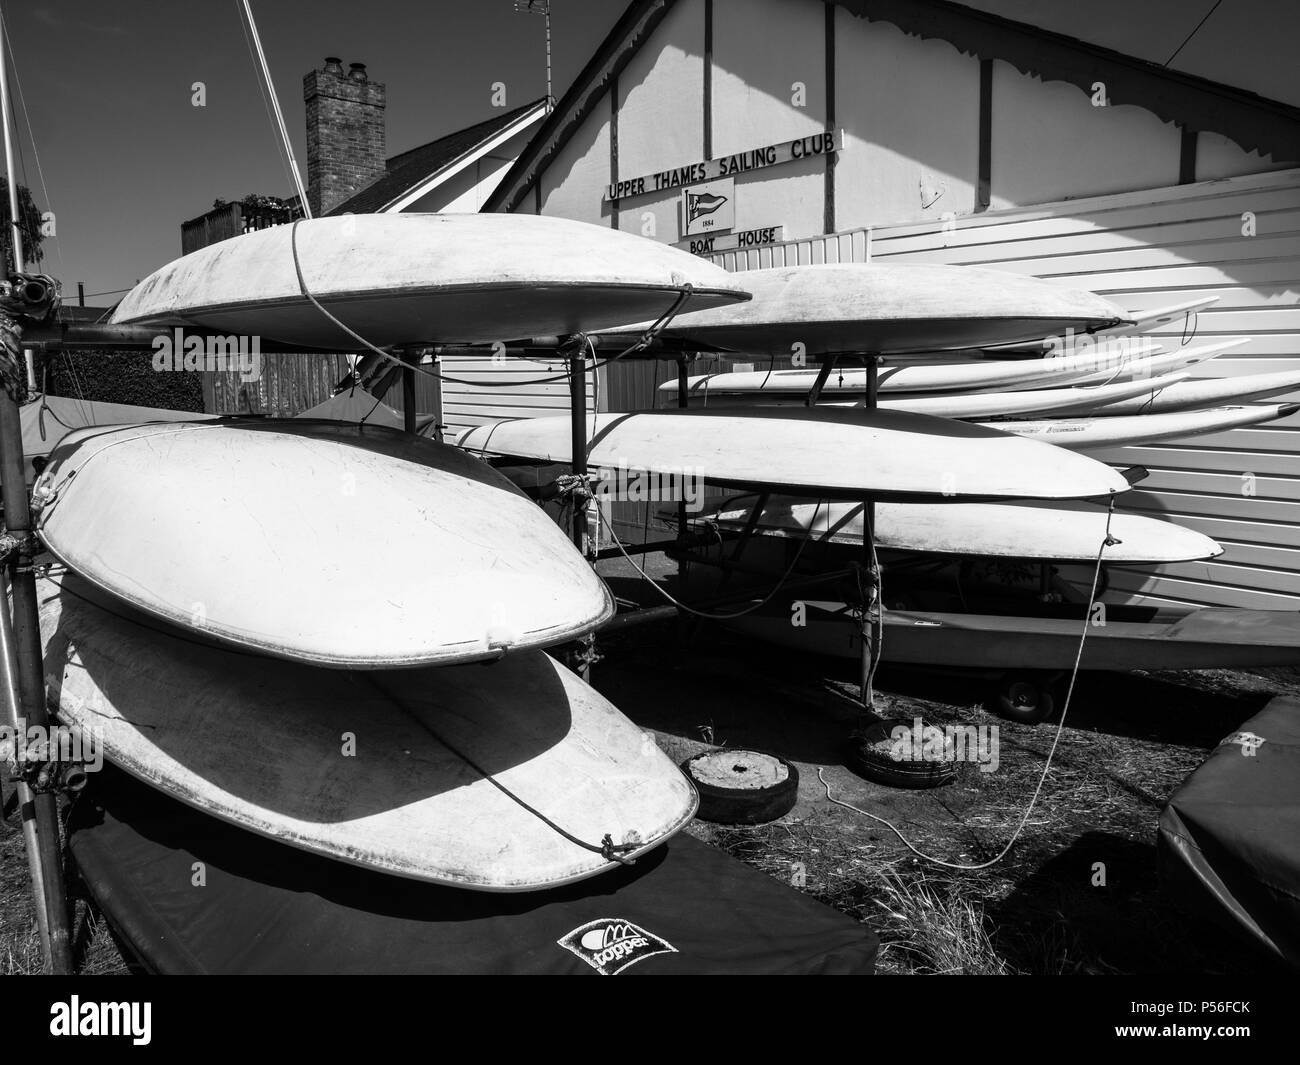 Club sailing Black and White Stock Photos & Images - Alamy